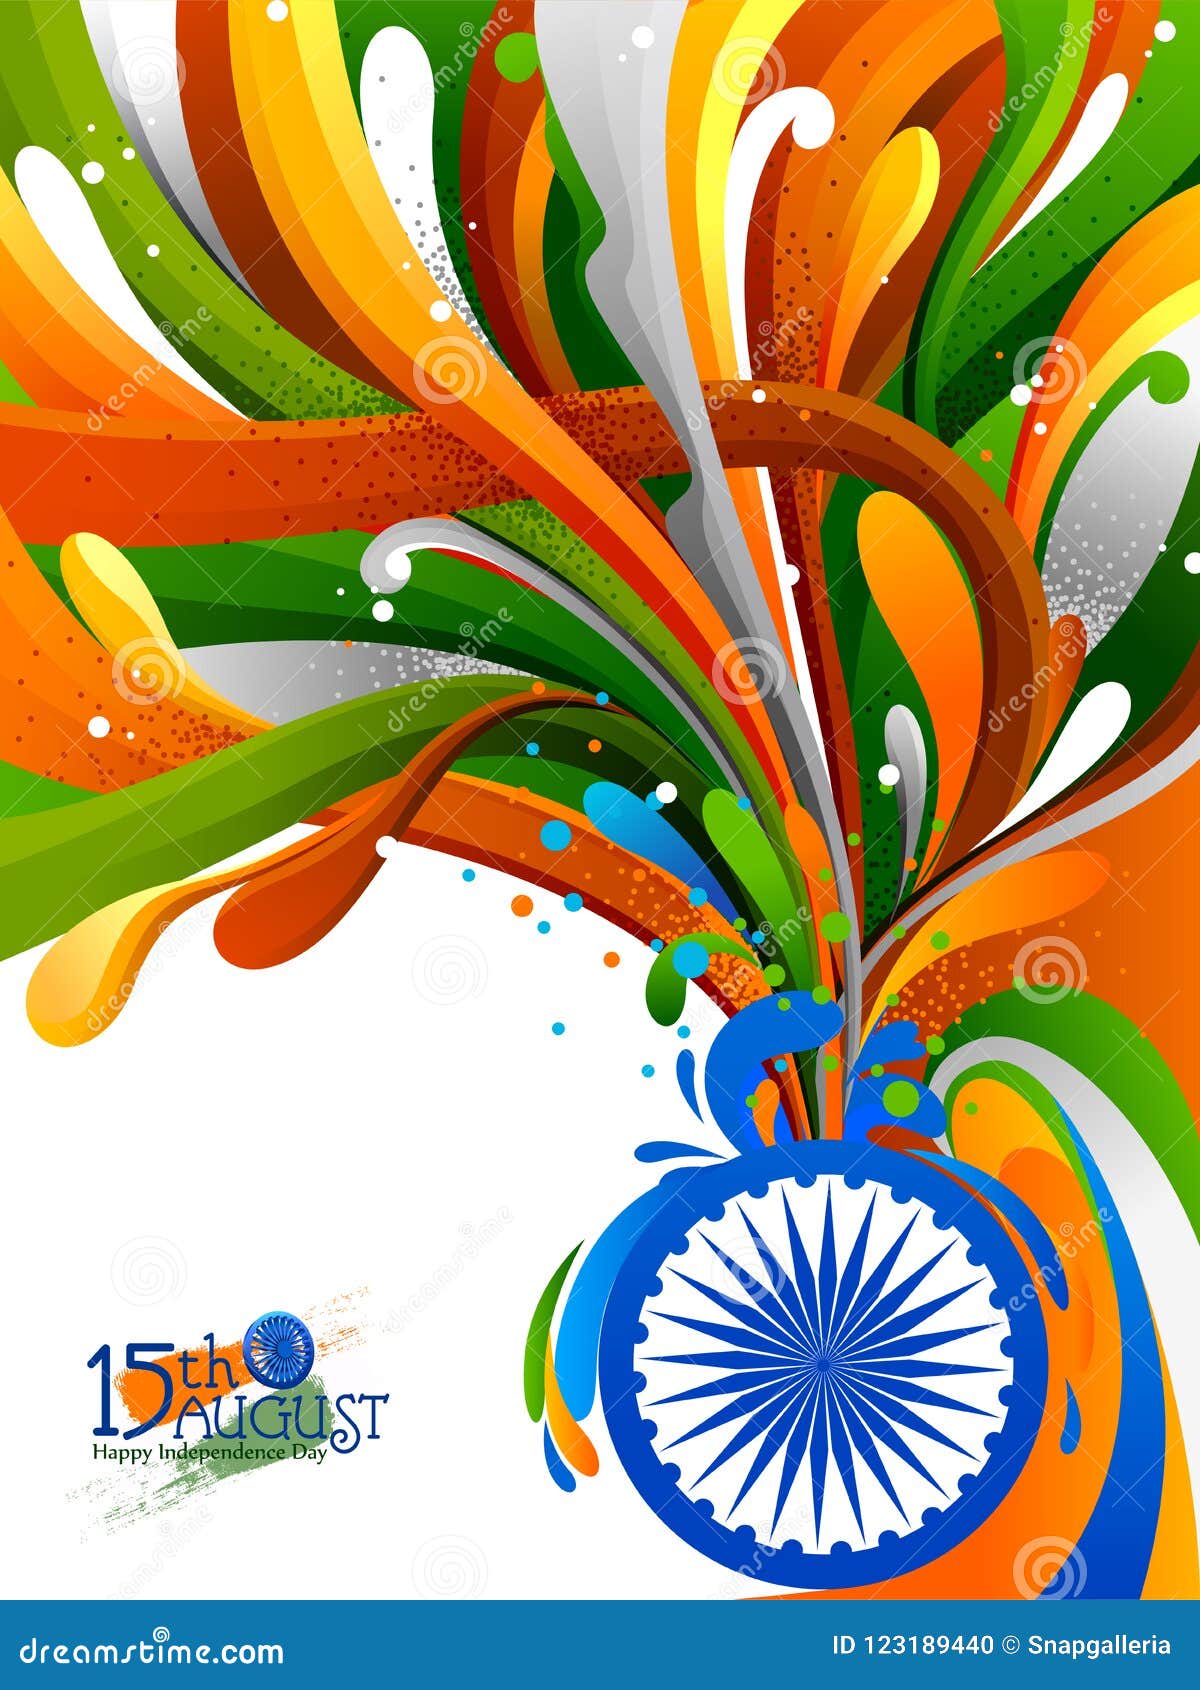 Splash of Indian Flag on Happy Independence Day of India Background Stock  Vector - Illustration of indian, color: 123189440